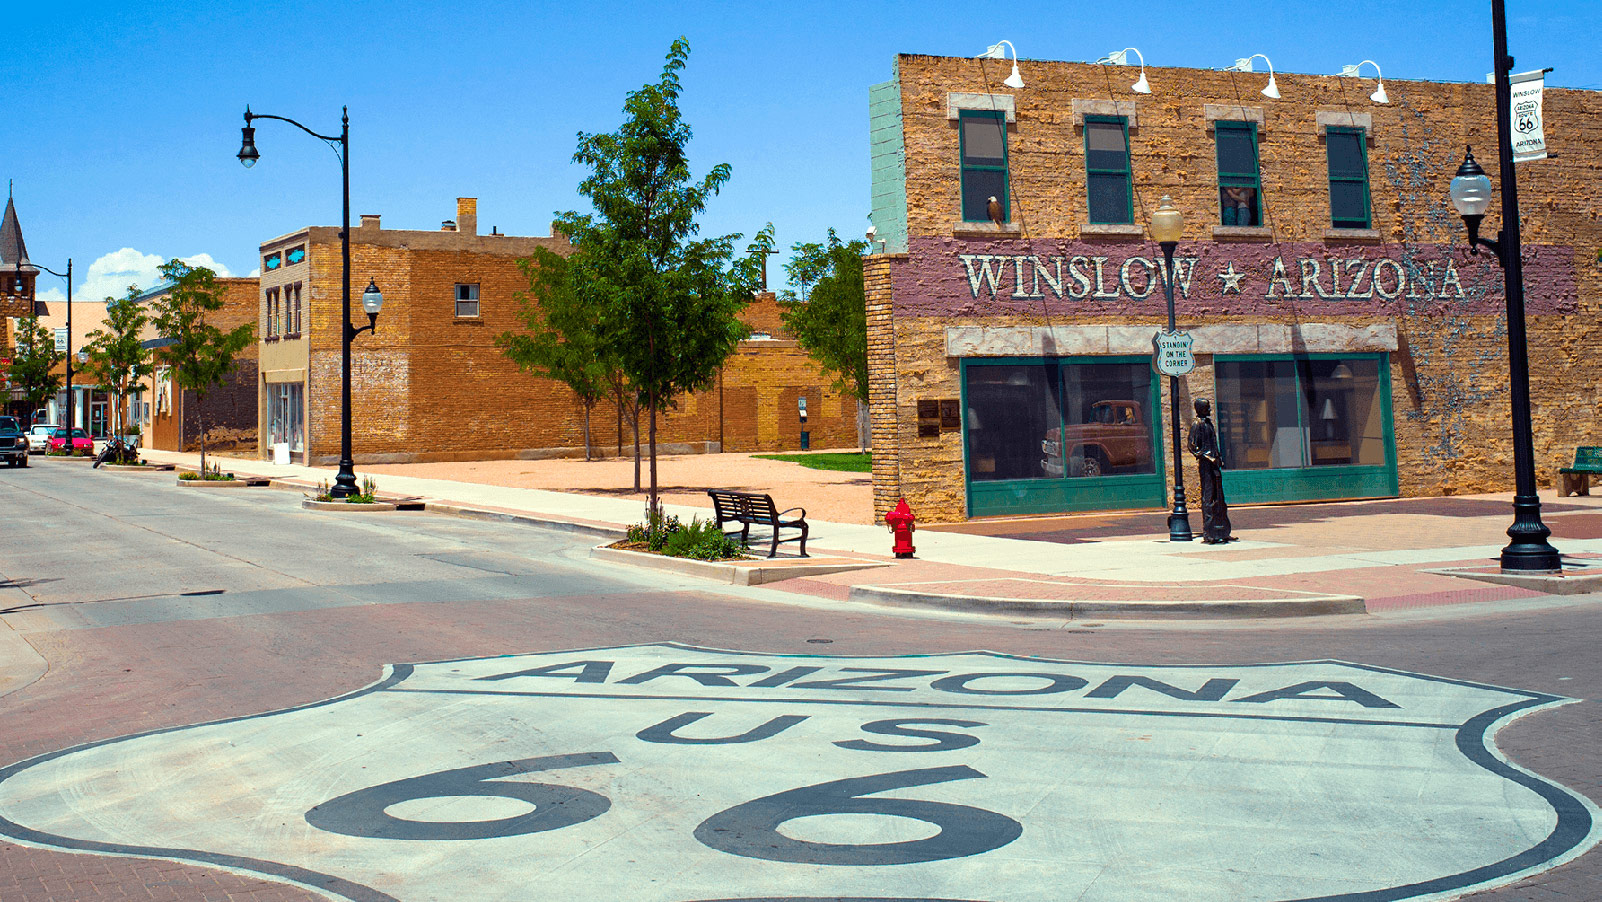 Route 66 sign in Winslow, Arizona